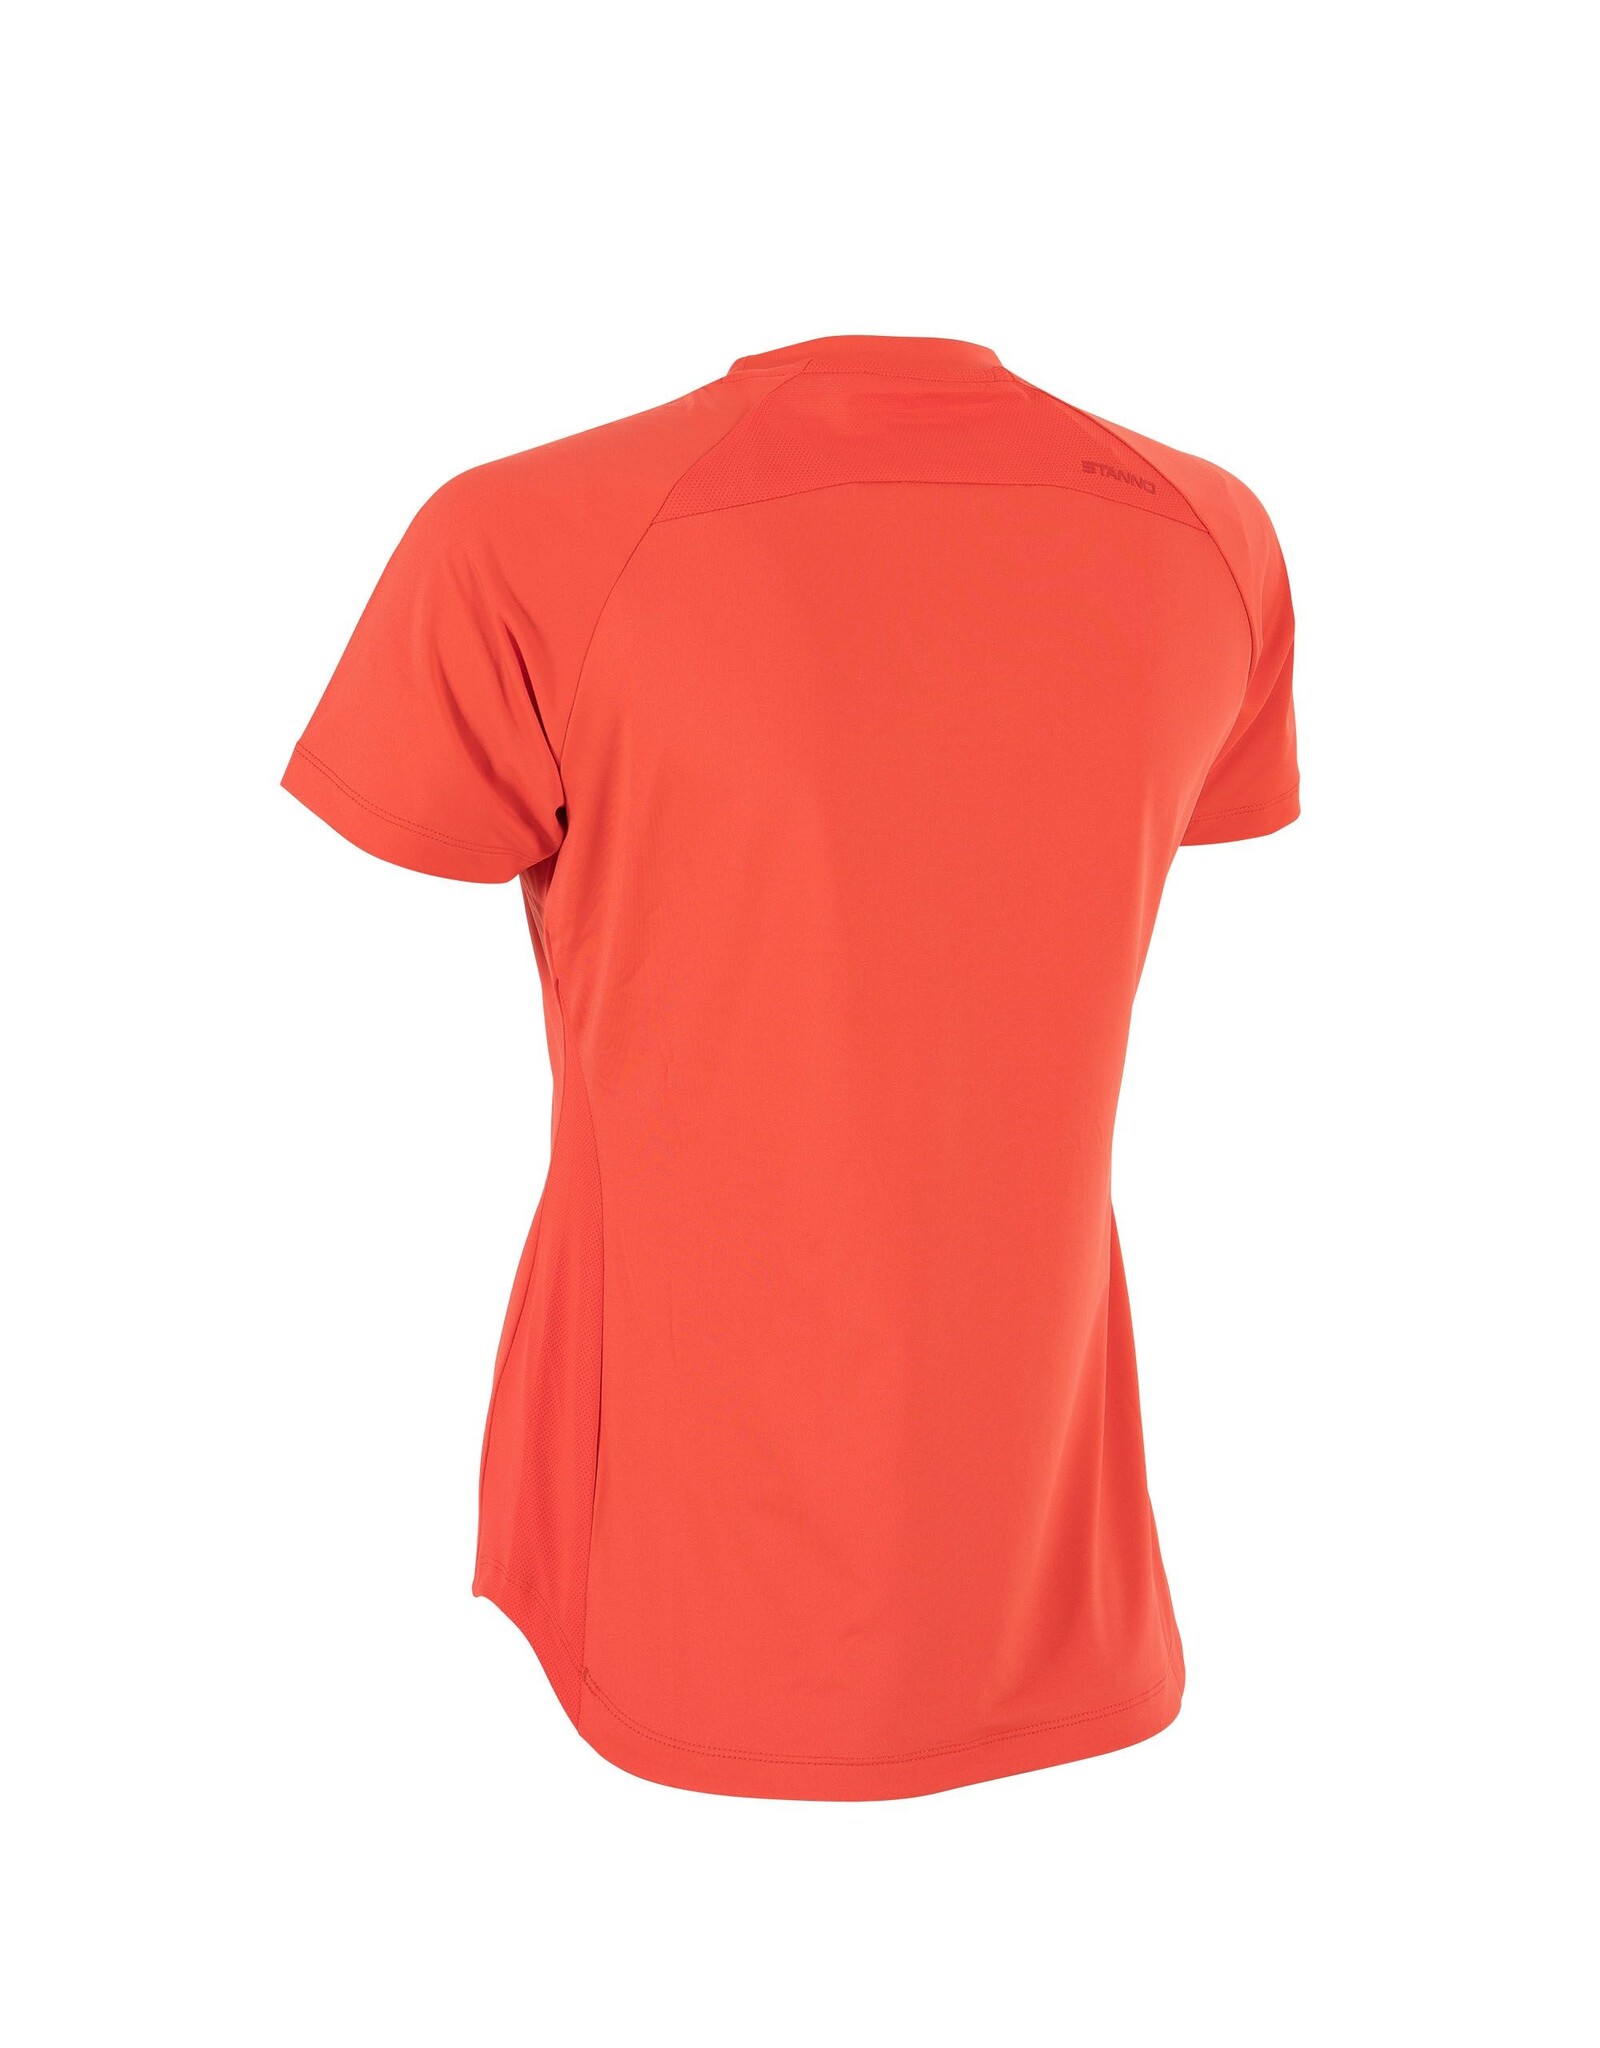 Stanno Functionals Training Tee ladies-Red